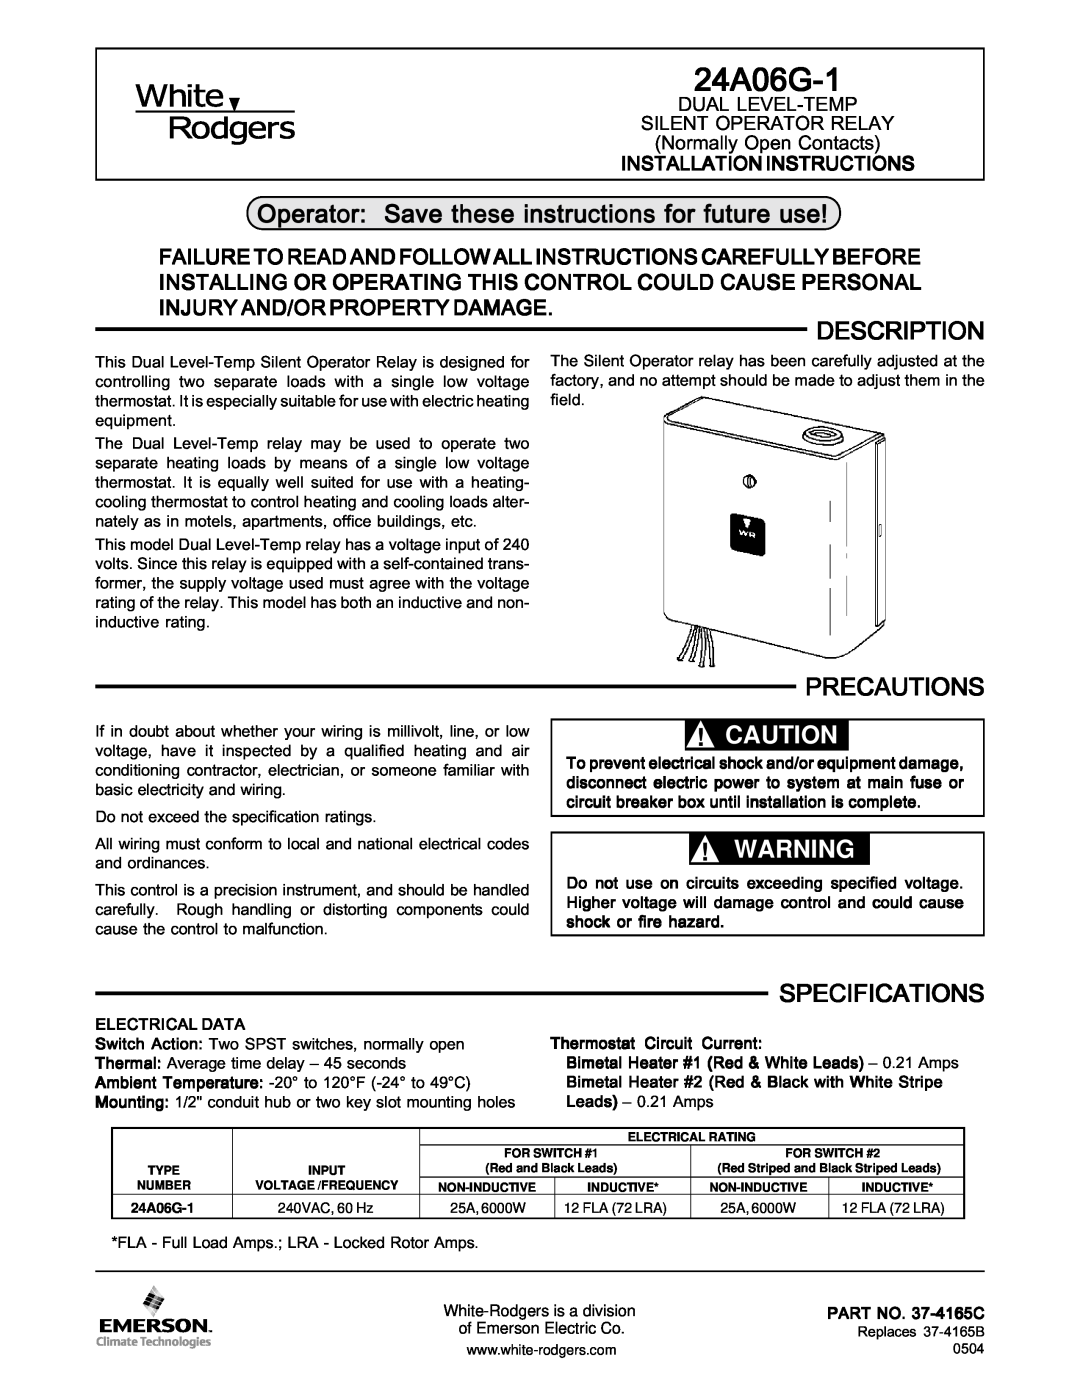 White Rodgers 24A06G-1 specifications Operator Save these instructions for future use, Description, Precautions 